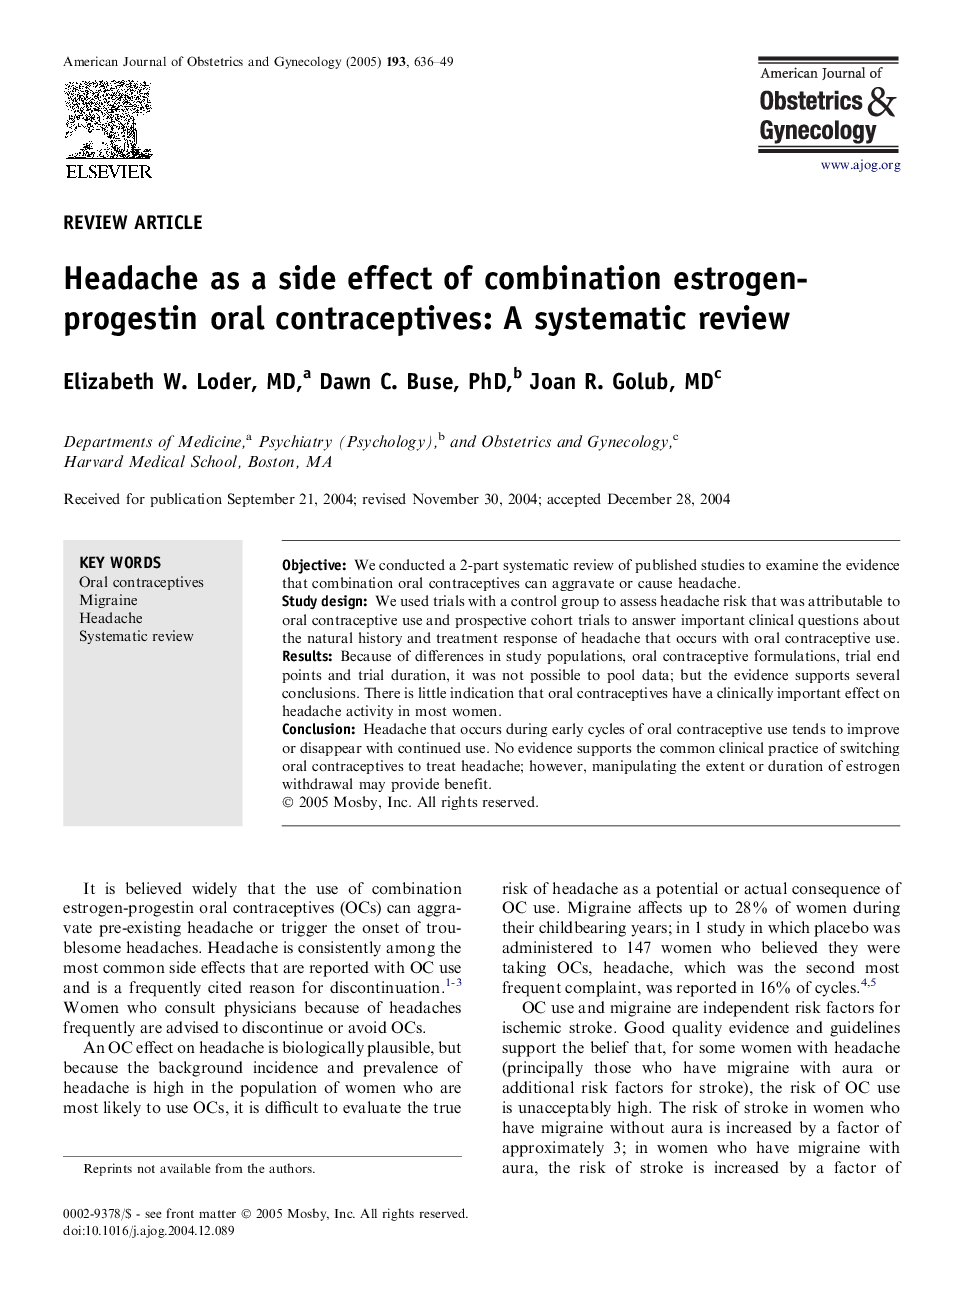 Headache as a side effect of combination estrogen-progestin oral contraceptives: A systematic review